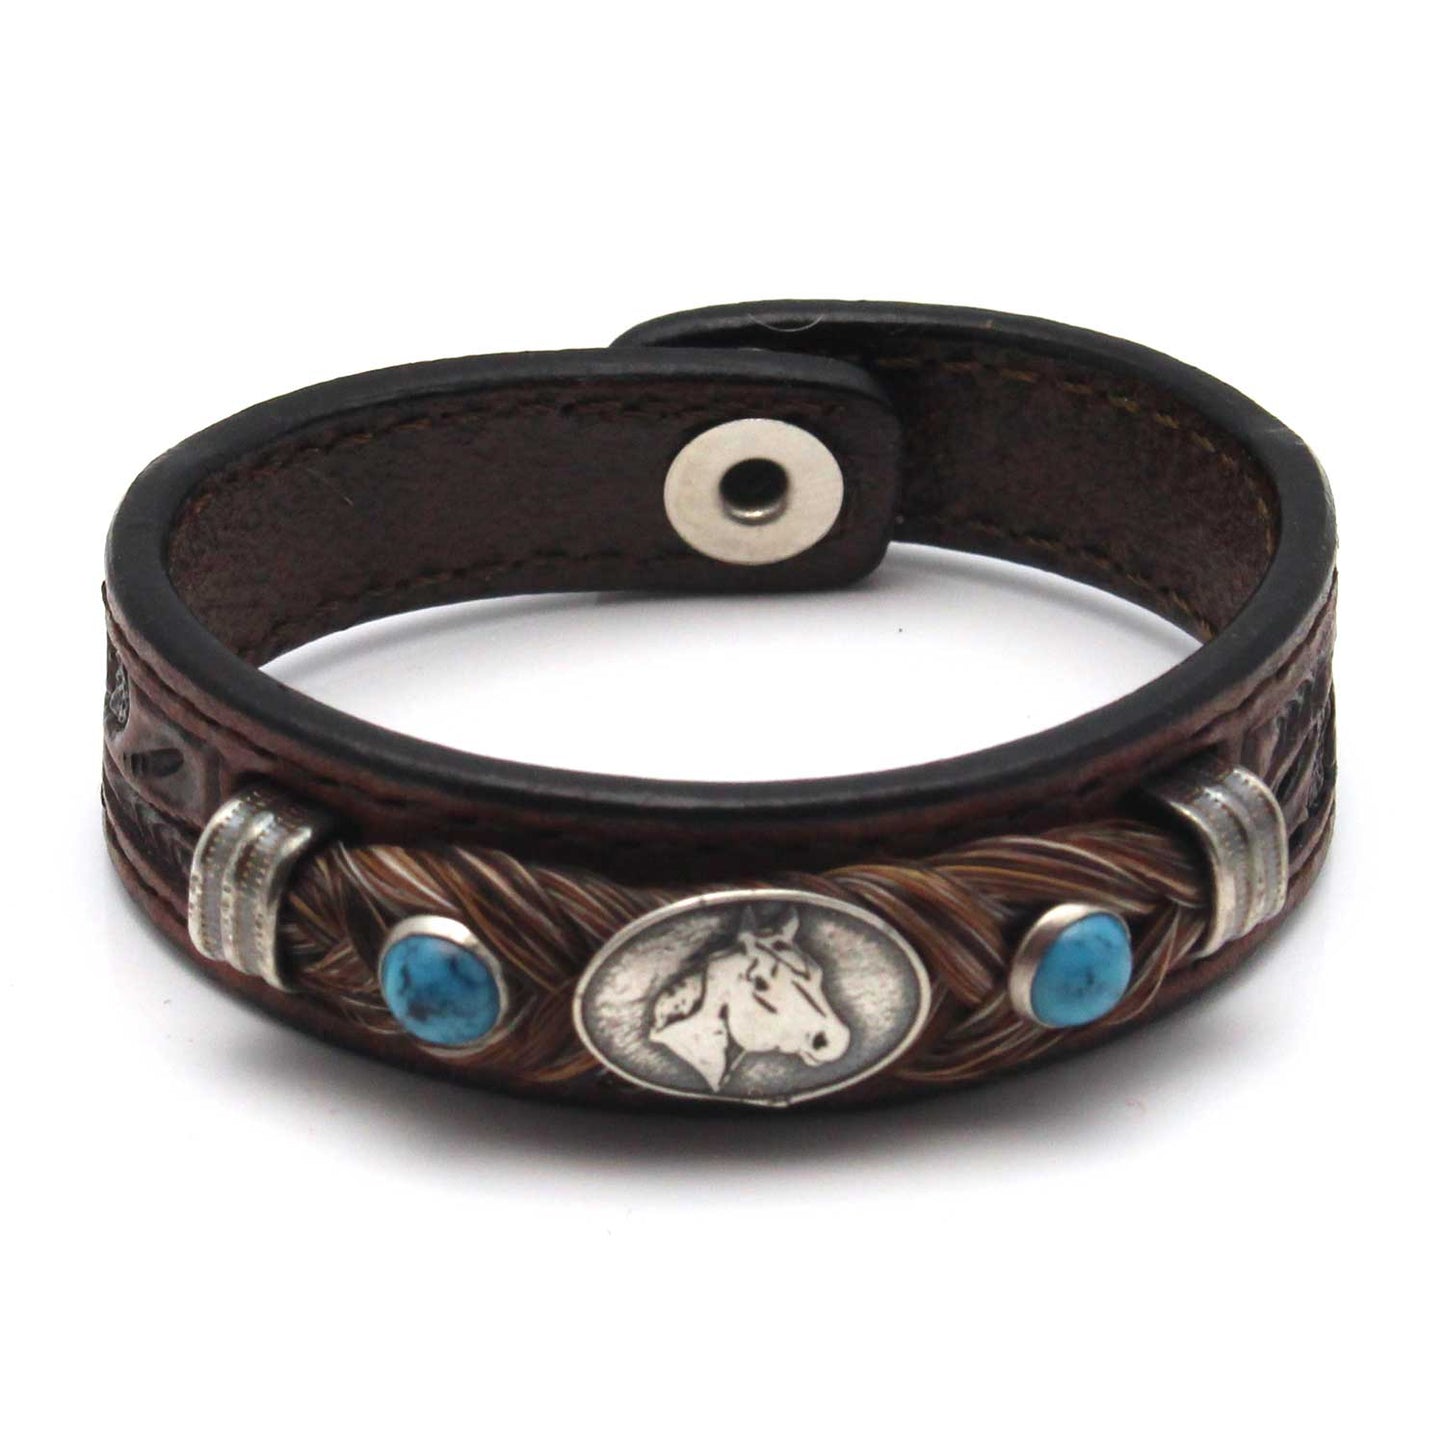 Leather Bracelet with Horsehair & accents